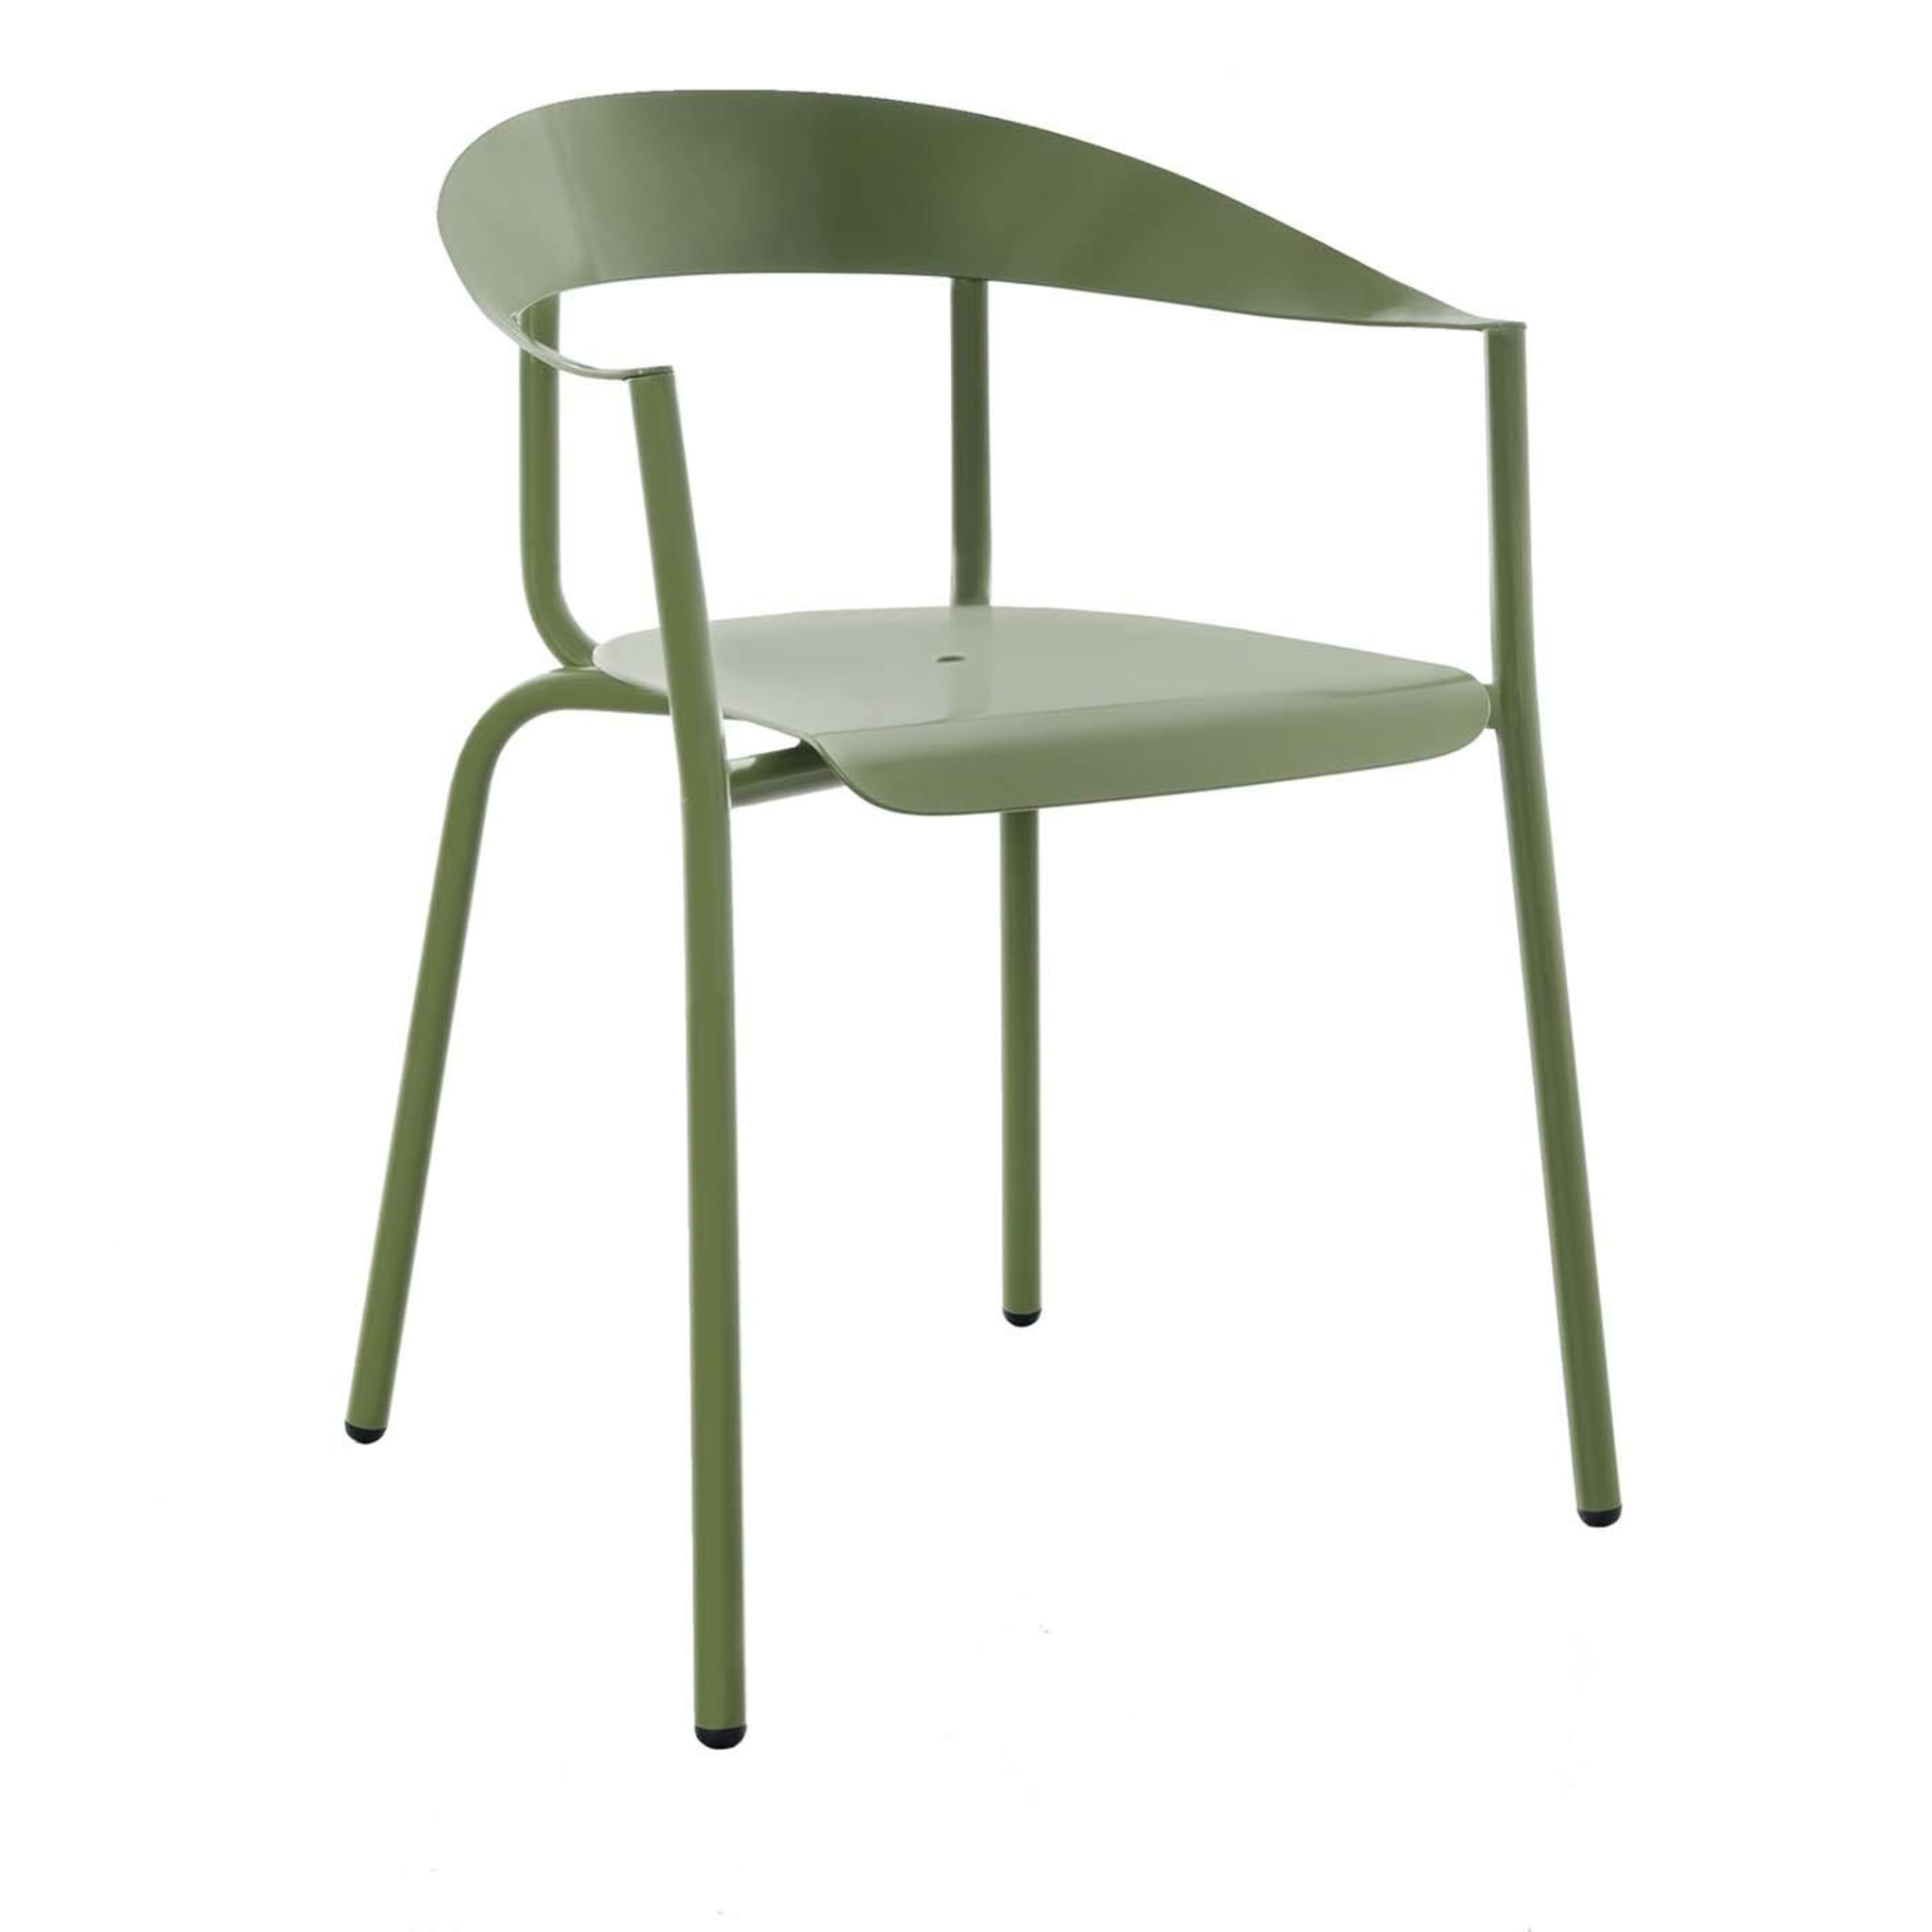 Olive Green AluMito Chair with Armrests by Pascal Bosetti - Main view